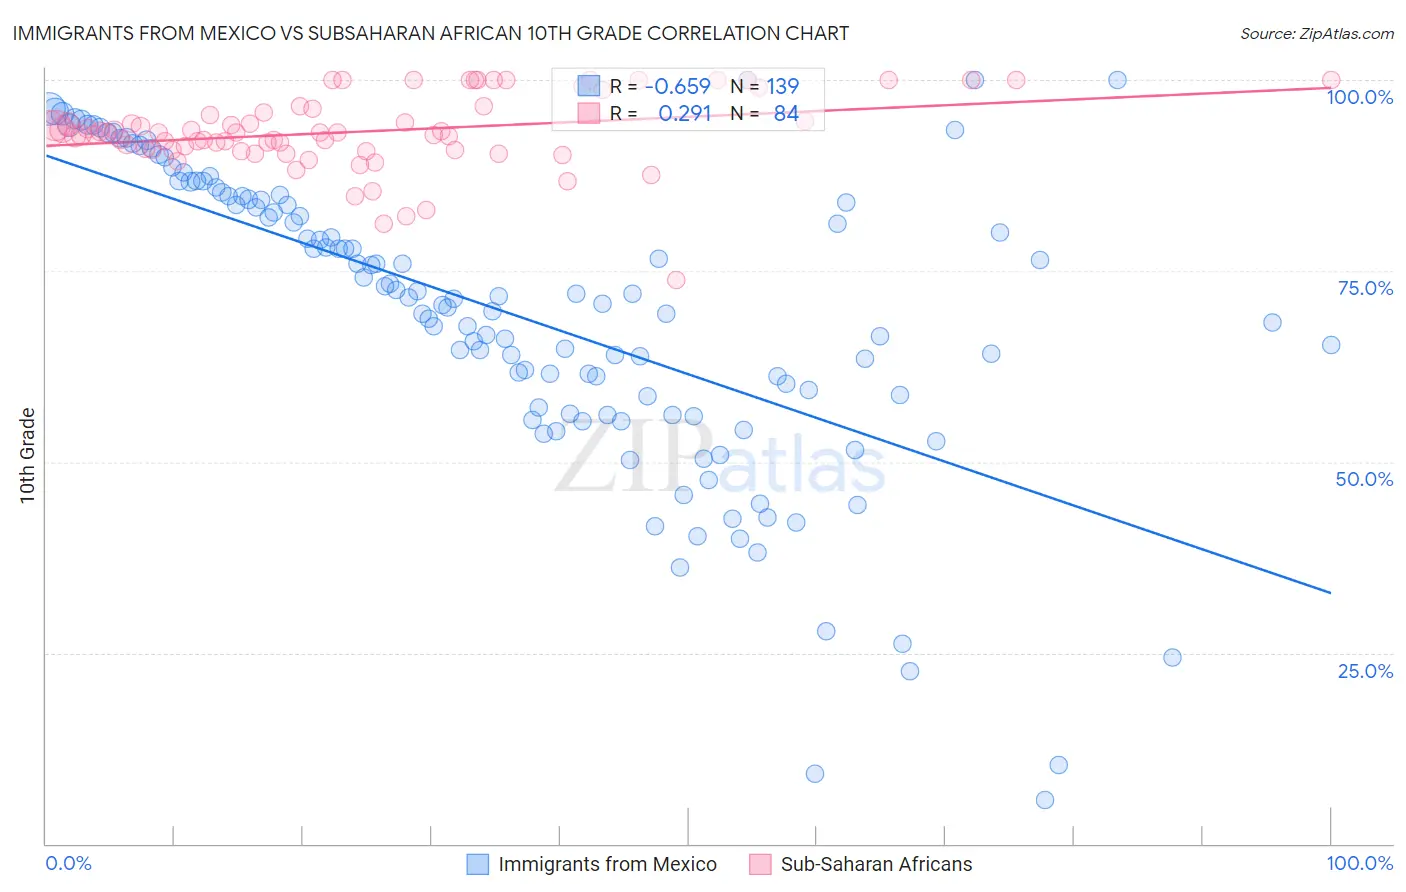 Immigrants from Mexico vs Subsaharan African 10th Grade